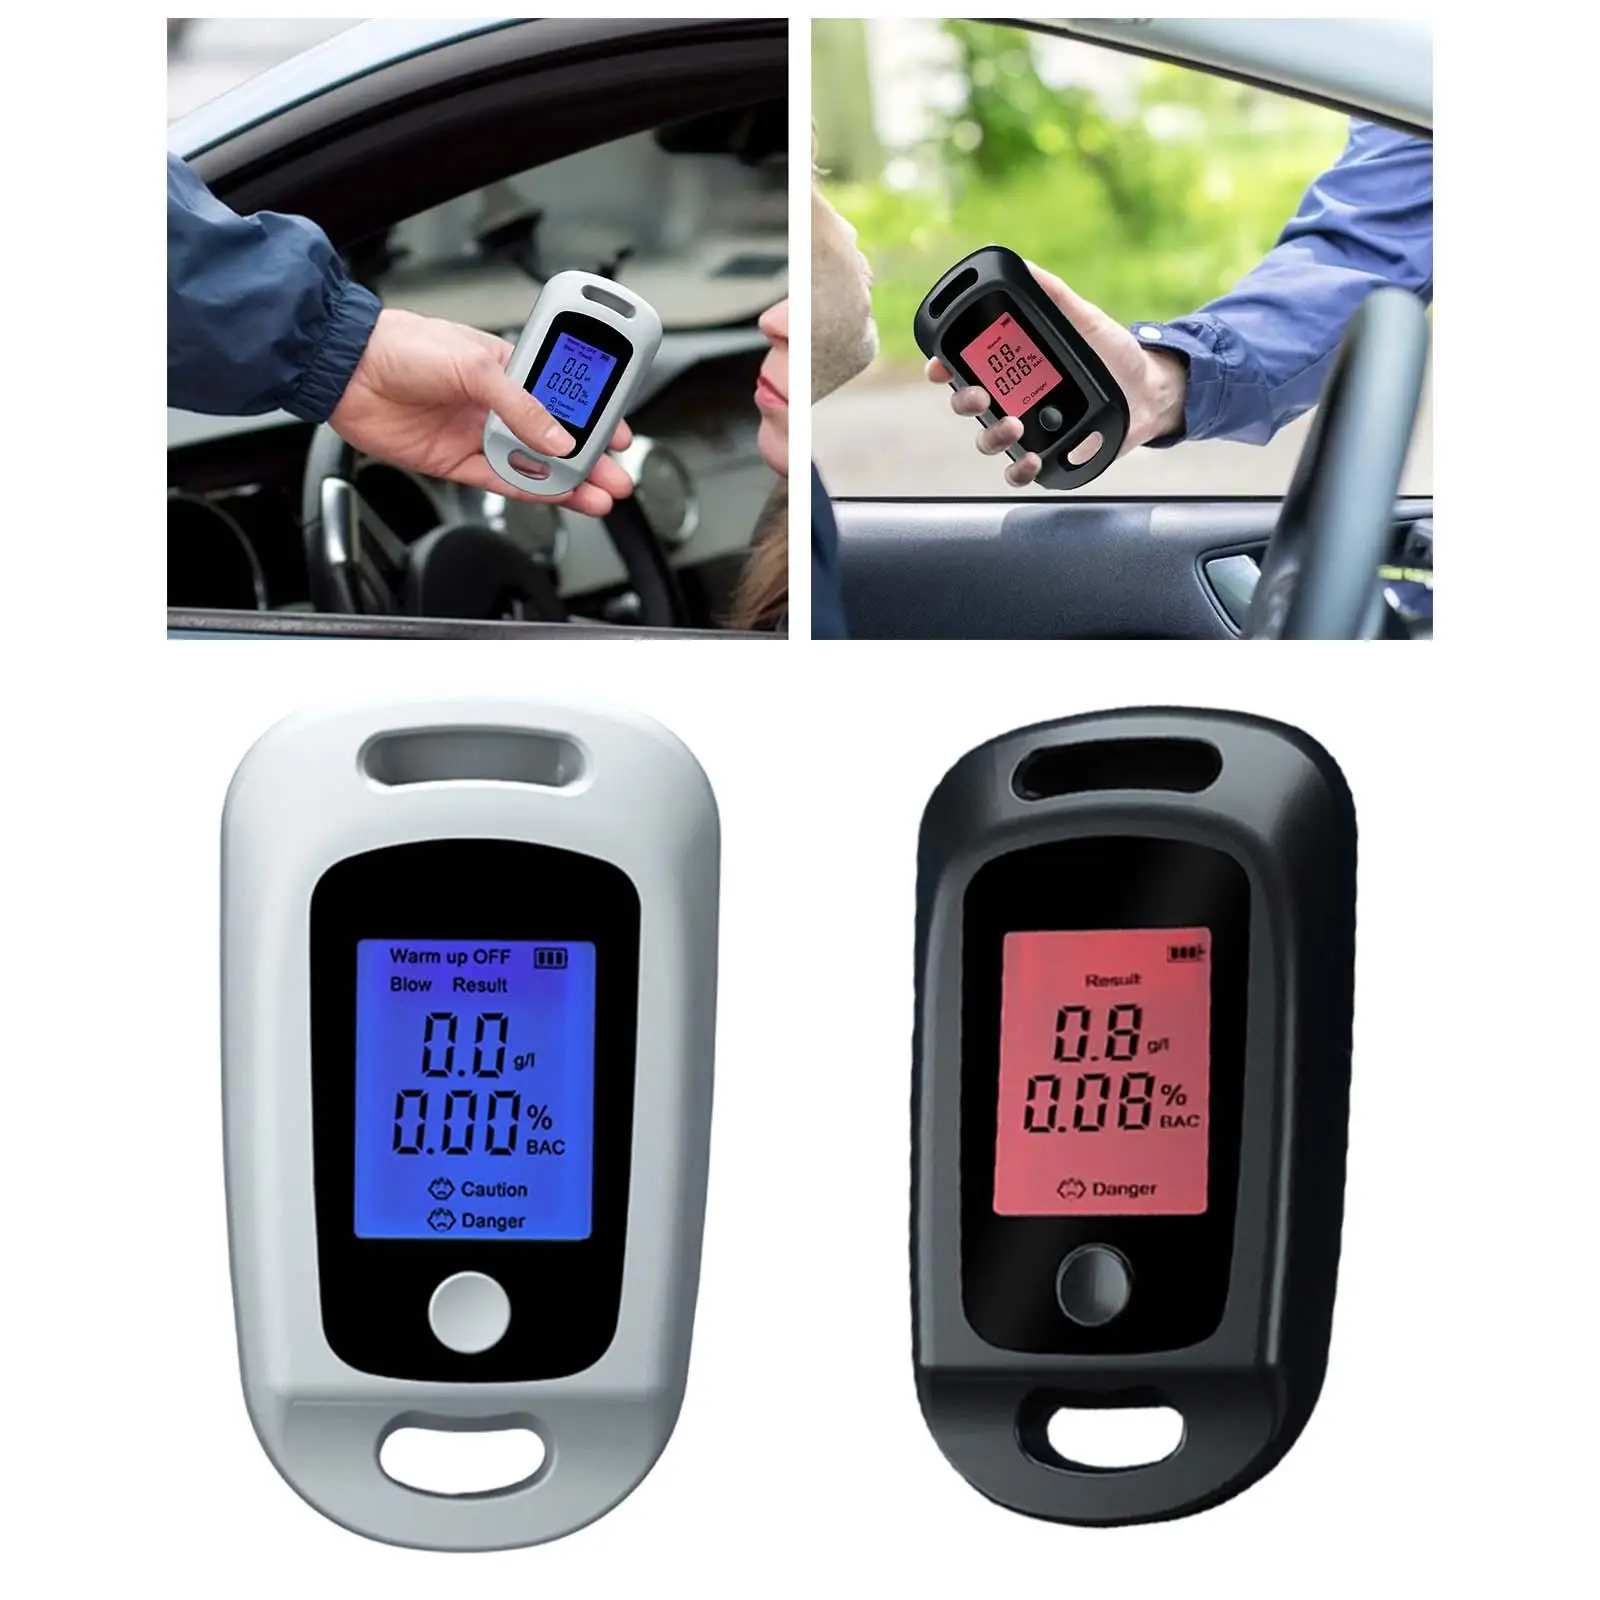 skyhousetree Alcohol Tester Air Blowing LCD Display Screen Mini for Home Use